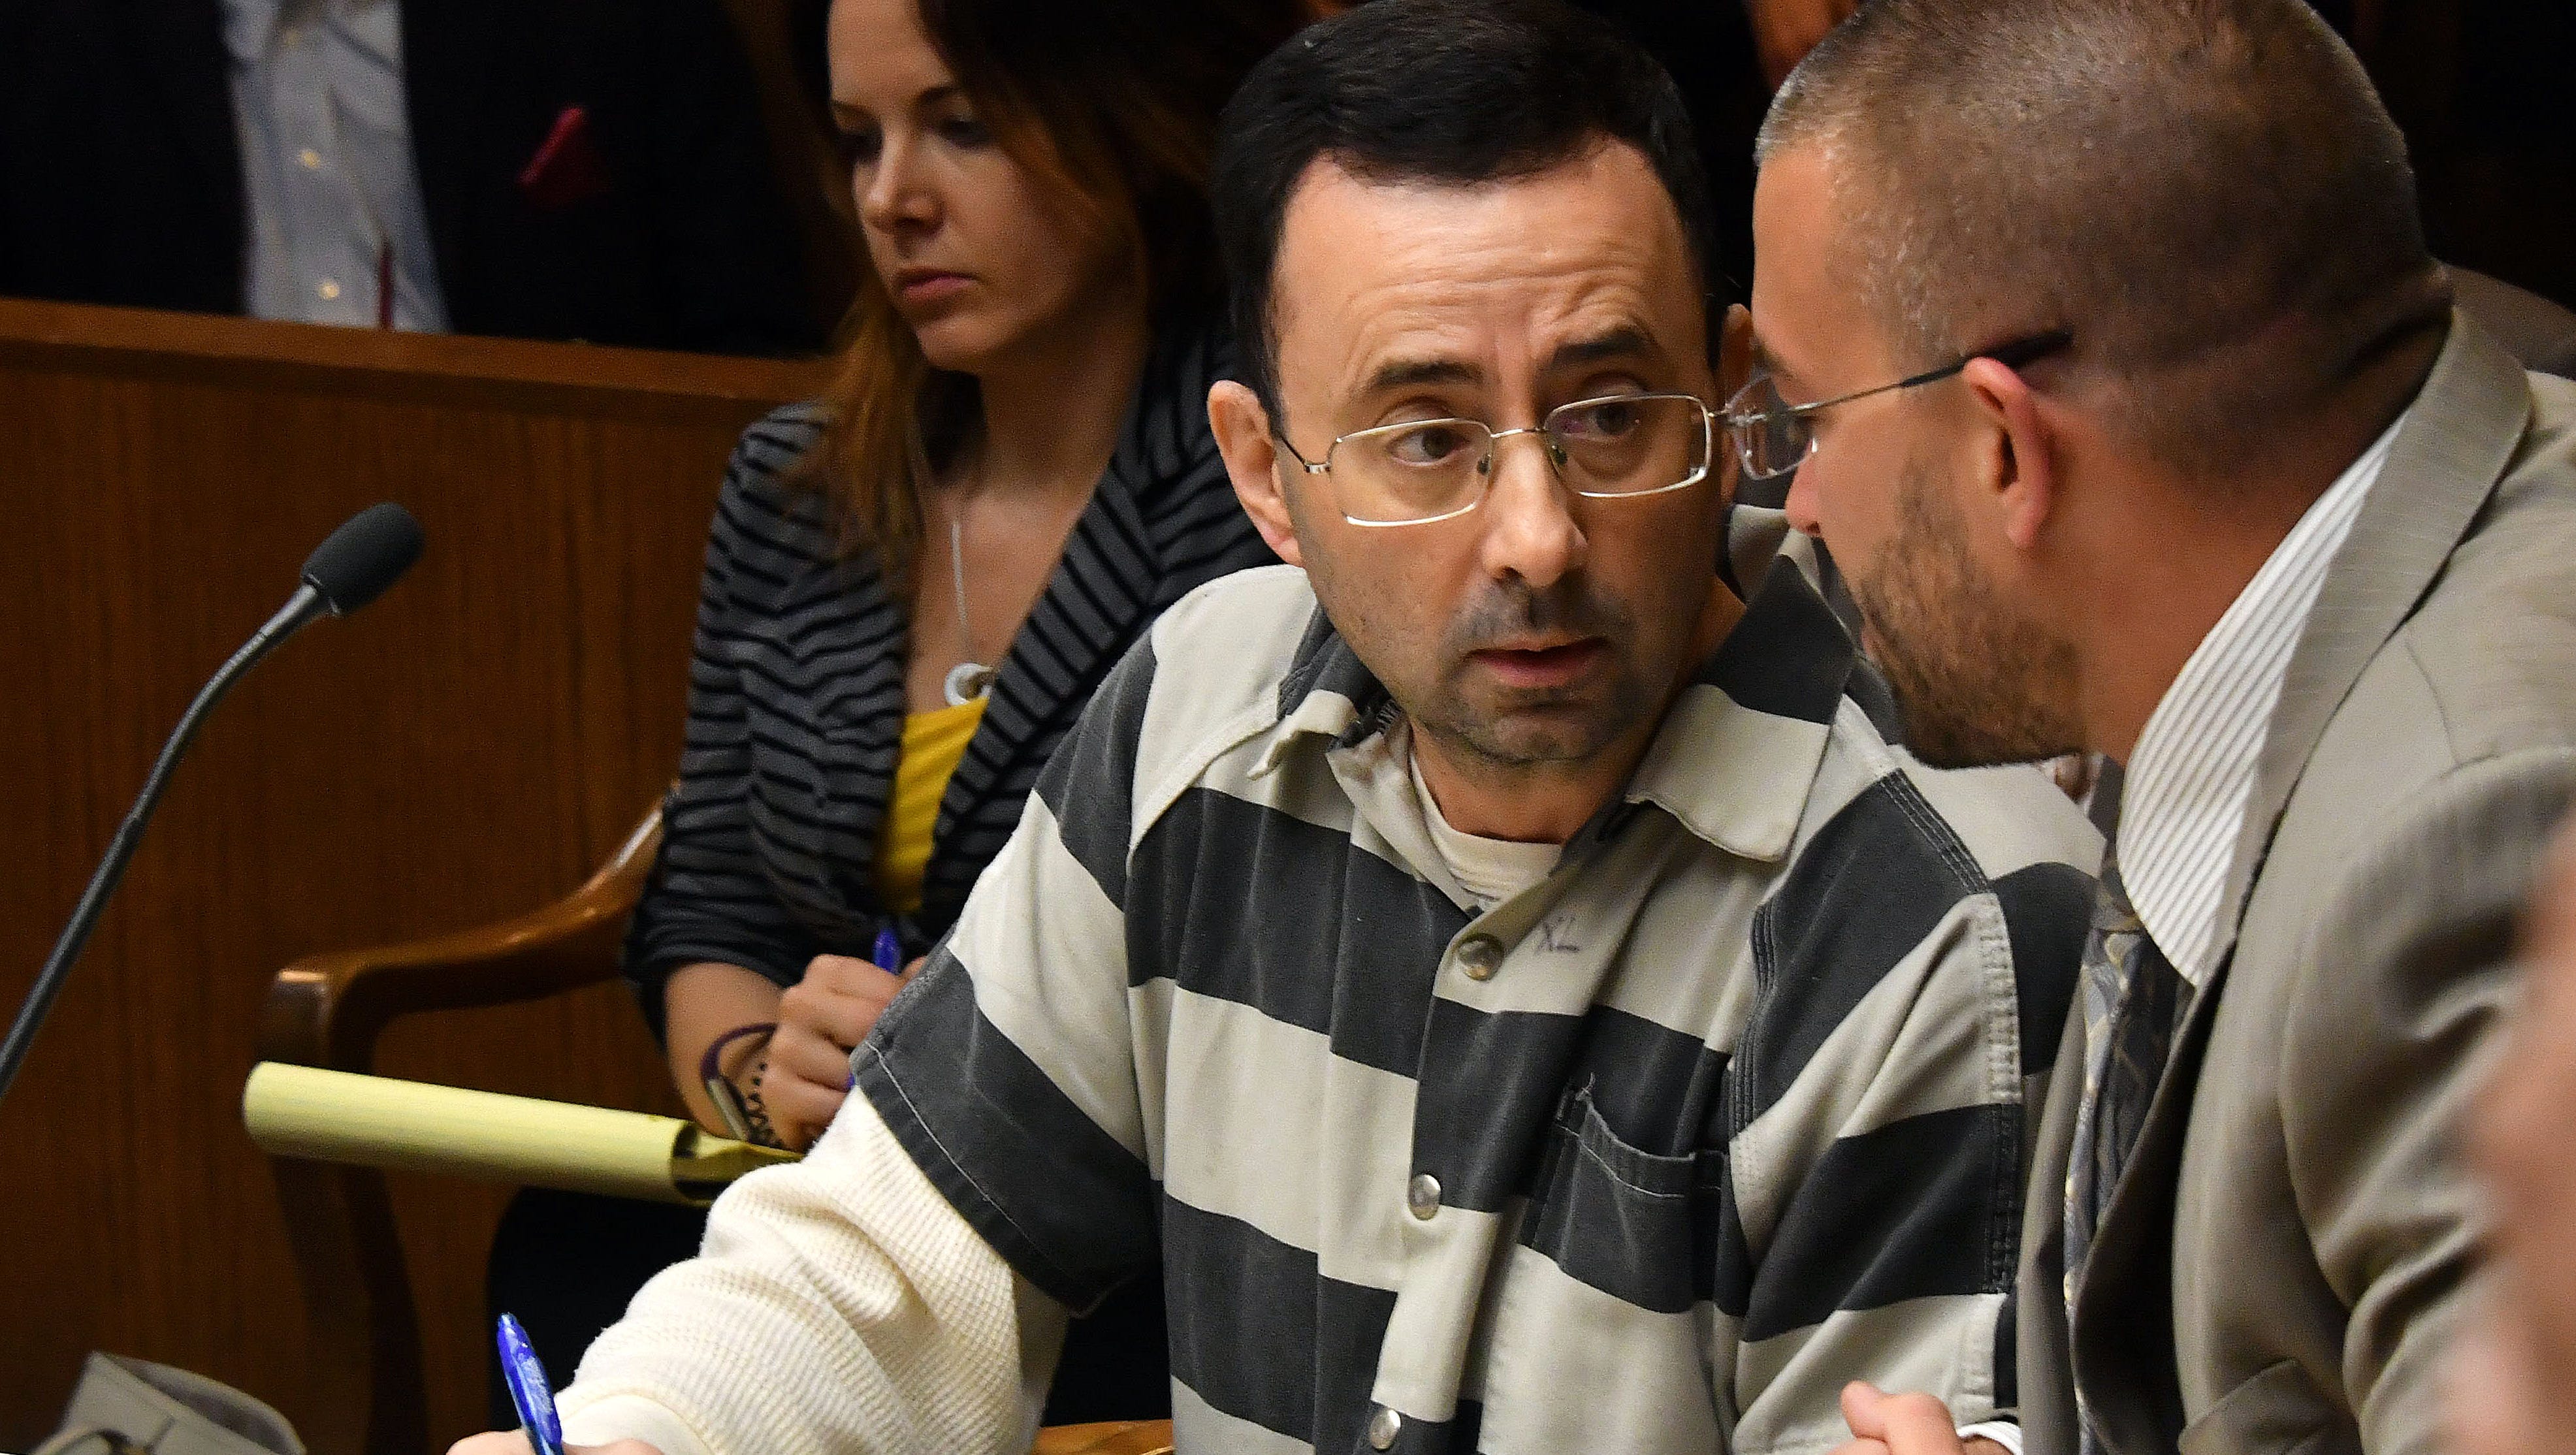 Larry Nassar goes over testimony with attorney Matt Newburg during his pre-trial hearing on May 12, 2017. Nassar is in jail, without bond. He will be sentenced Nov. 27, 2017 in the child porn case, with a prison term ranging from 5 to 60 years.